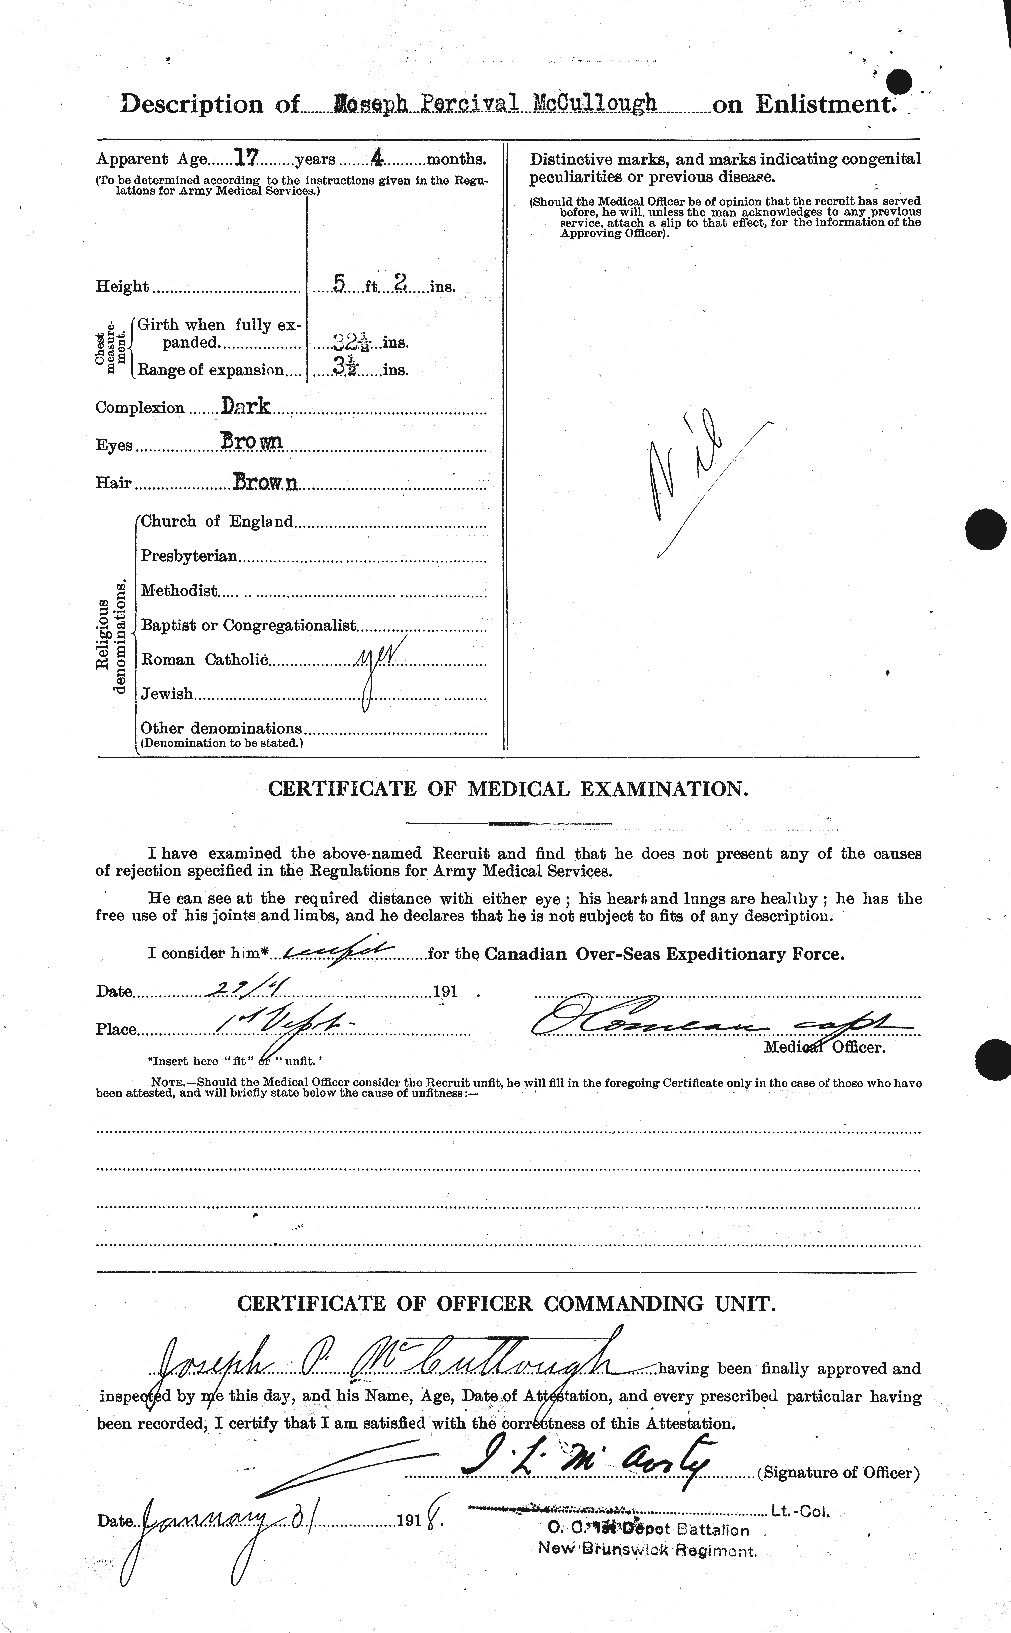 Personnel Records of the First World War - CEF 136891b